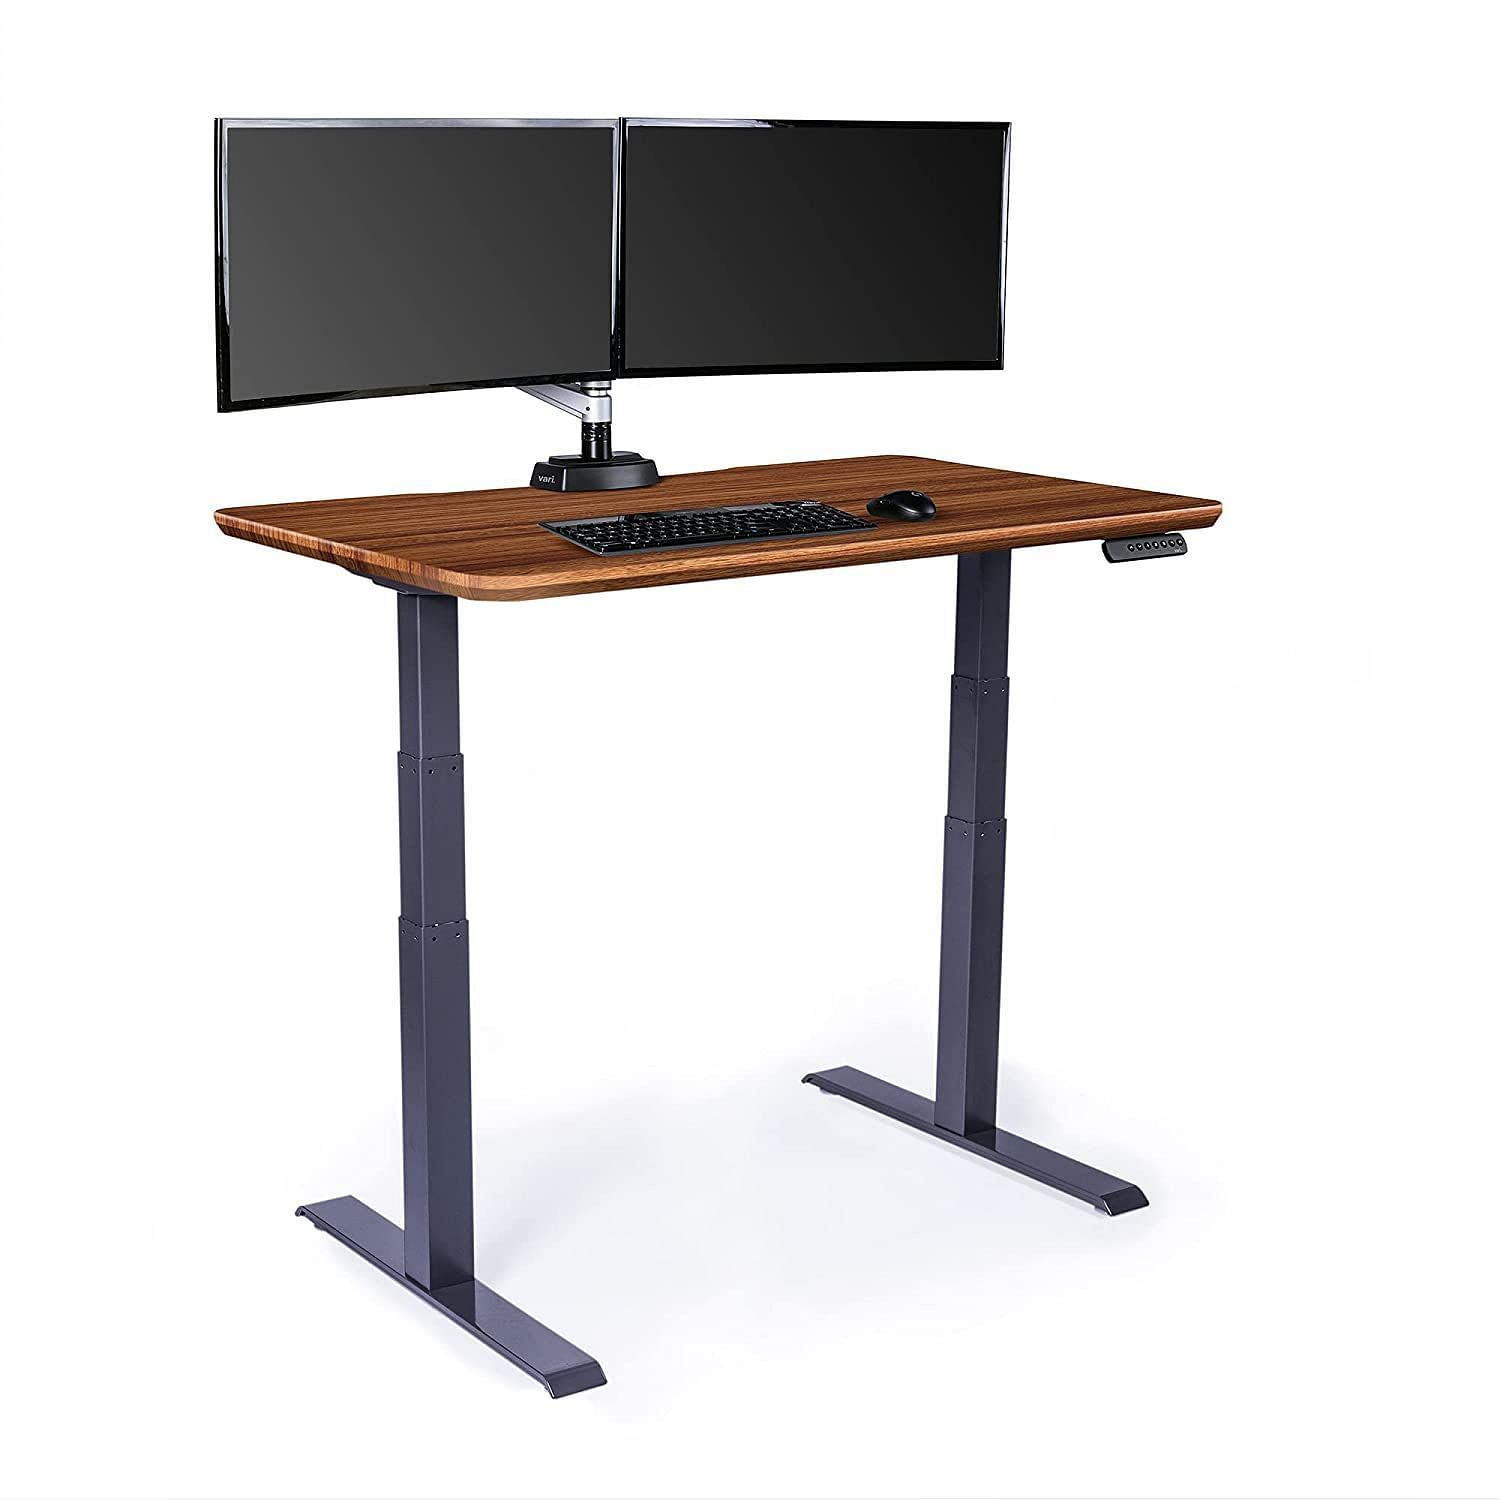 The Vari Electric Standing Desk stores four presets for your preferred heights (Image via Amazon)